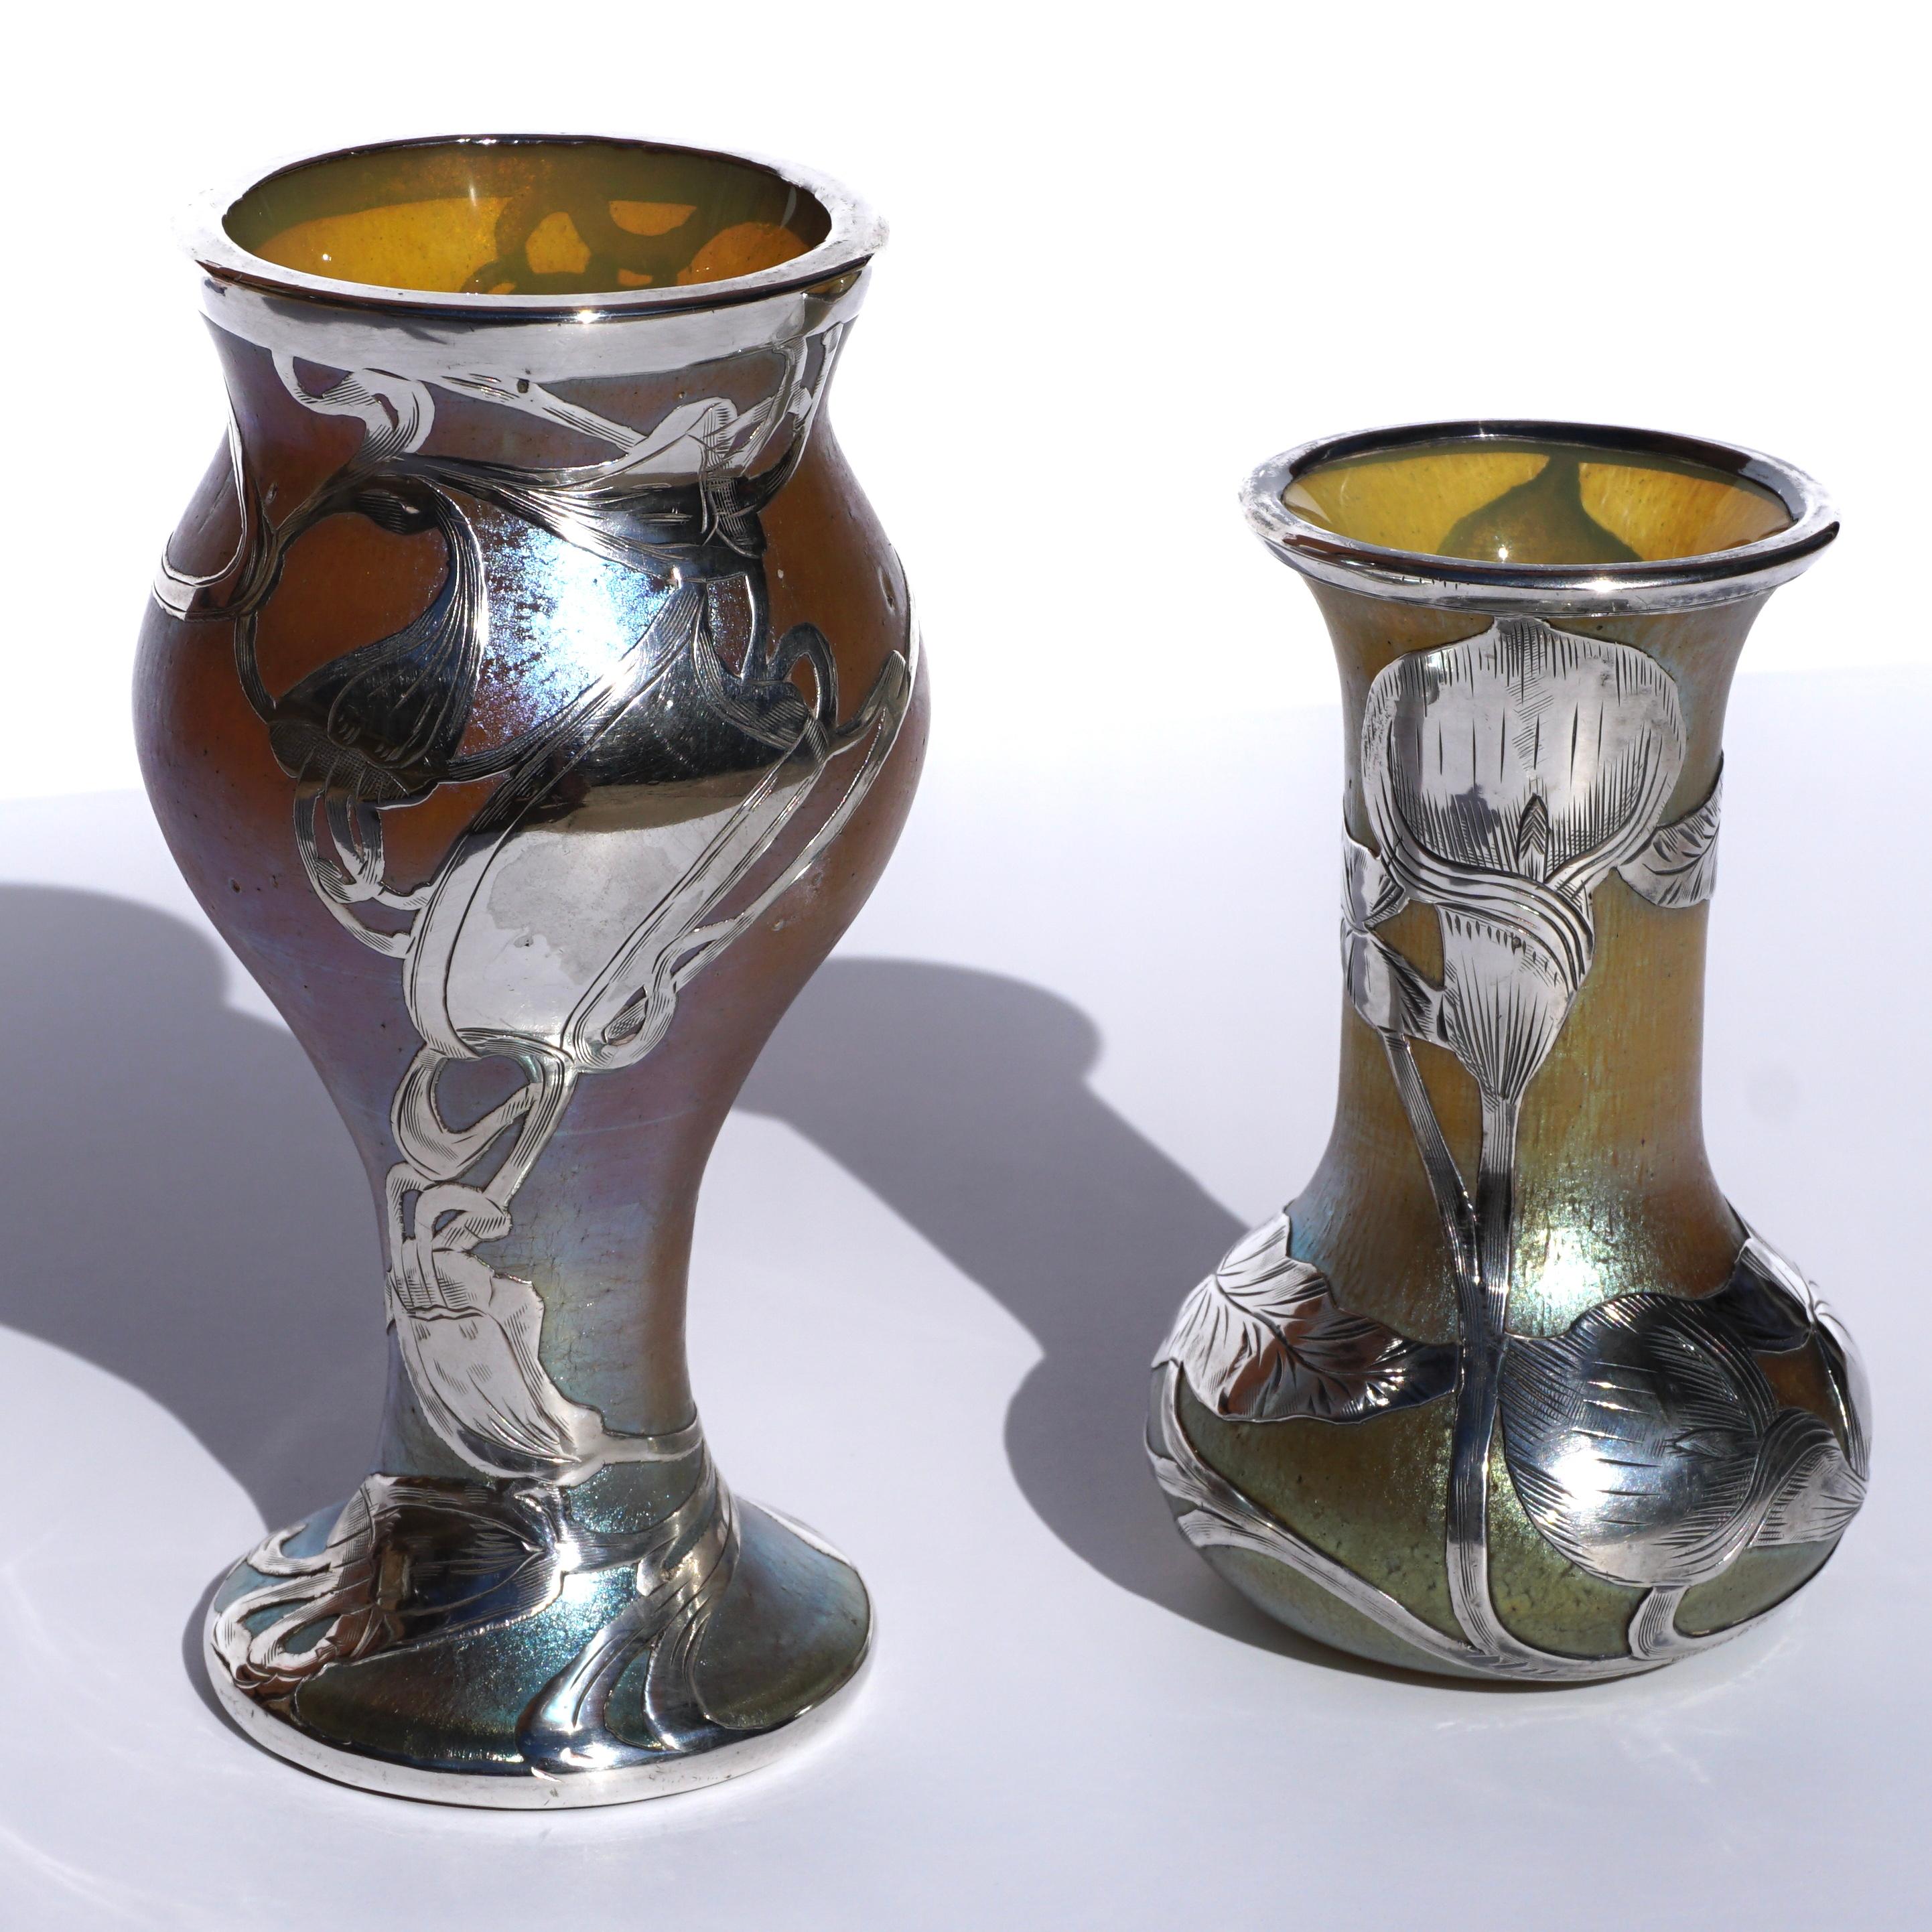 Loetz Art Nouveau circa 1900 art glass vases with floral and decorative scroll Silver Overlay. (Pair) 

Larger: Corset form in iridescent gold glass decorated with scrolling silver overlay and a blank cartouche.
Height: 5.25 X 2.75 Diameter